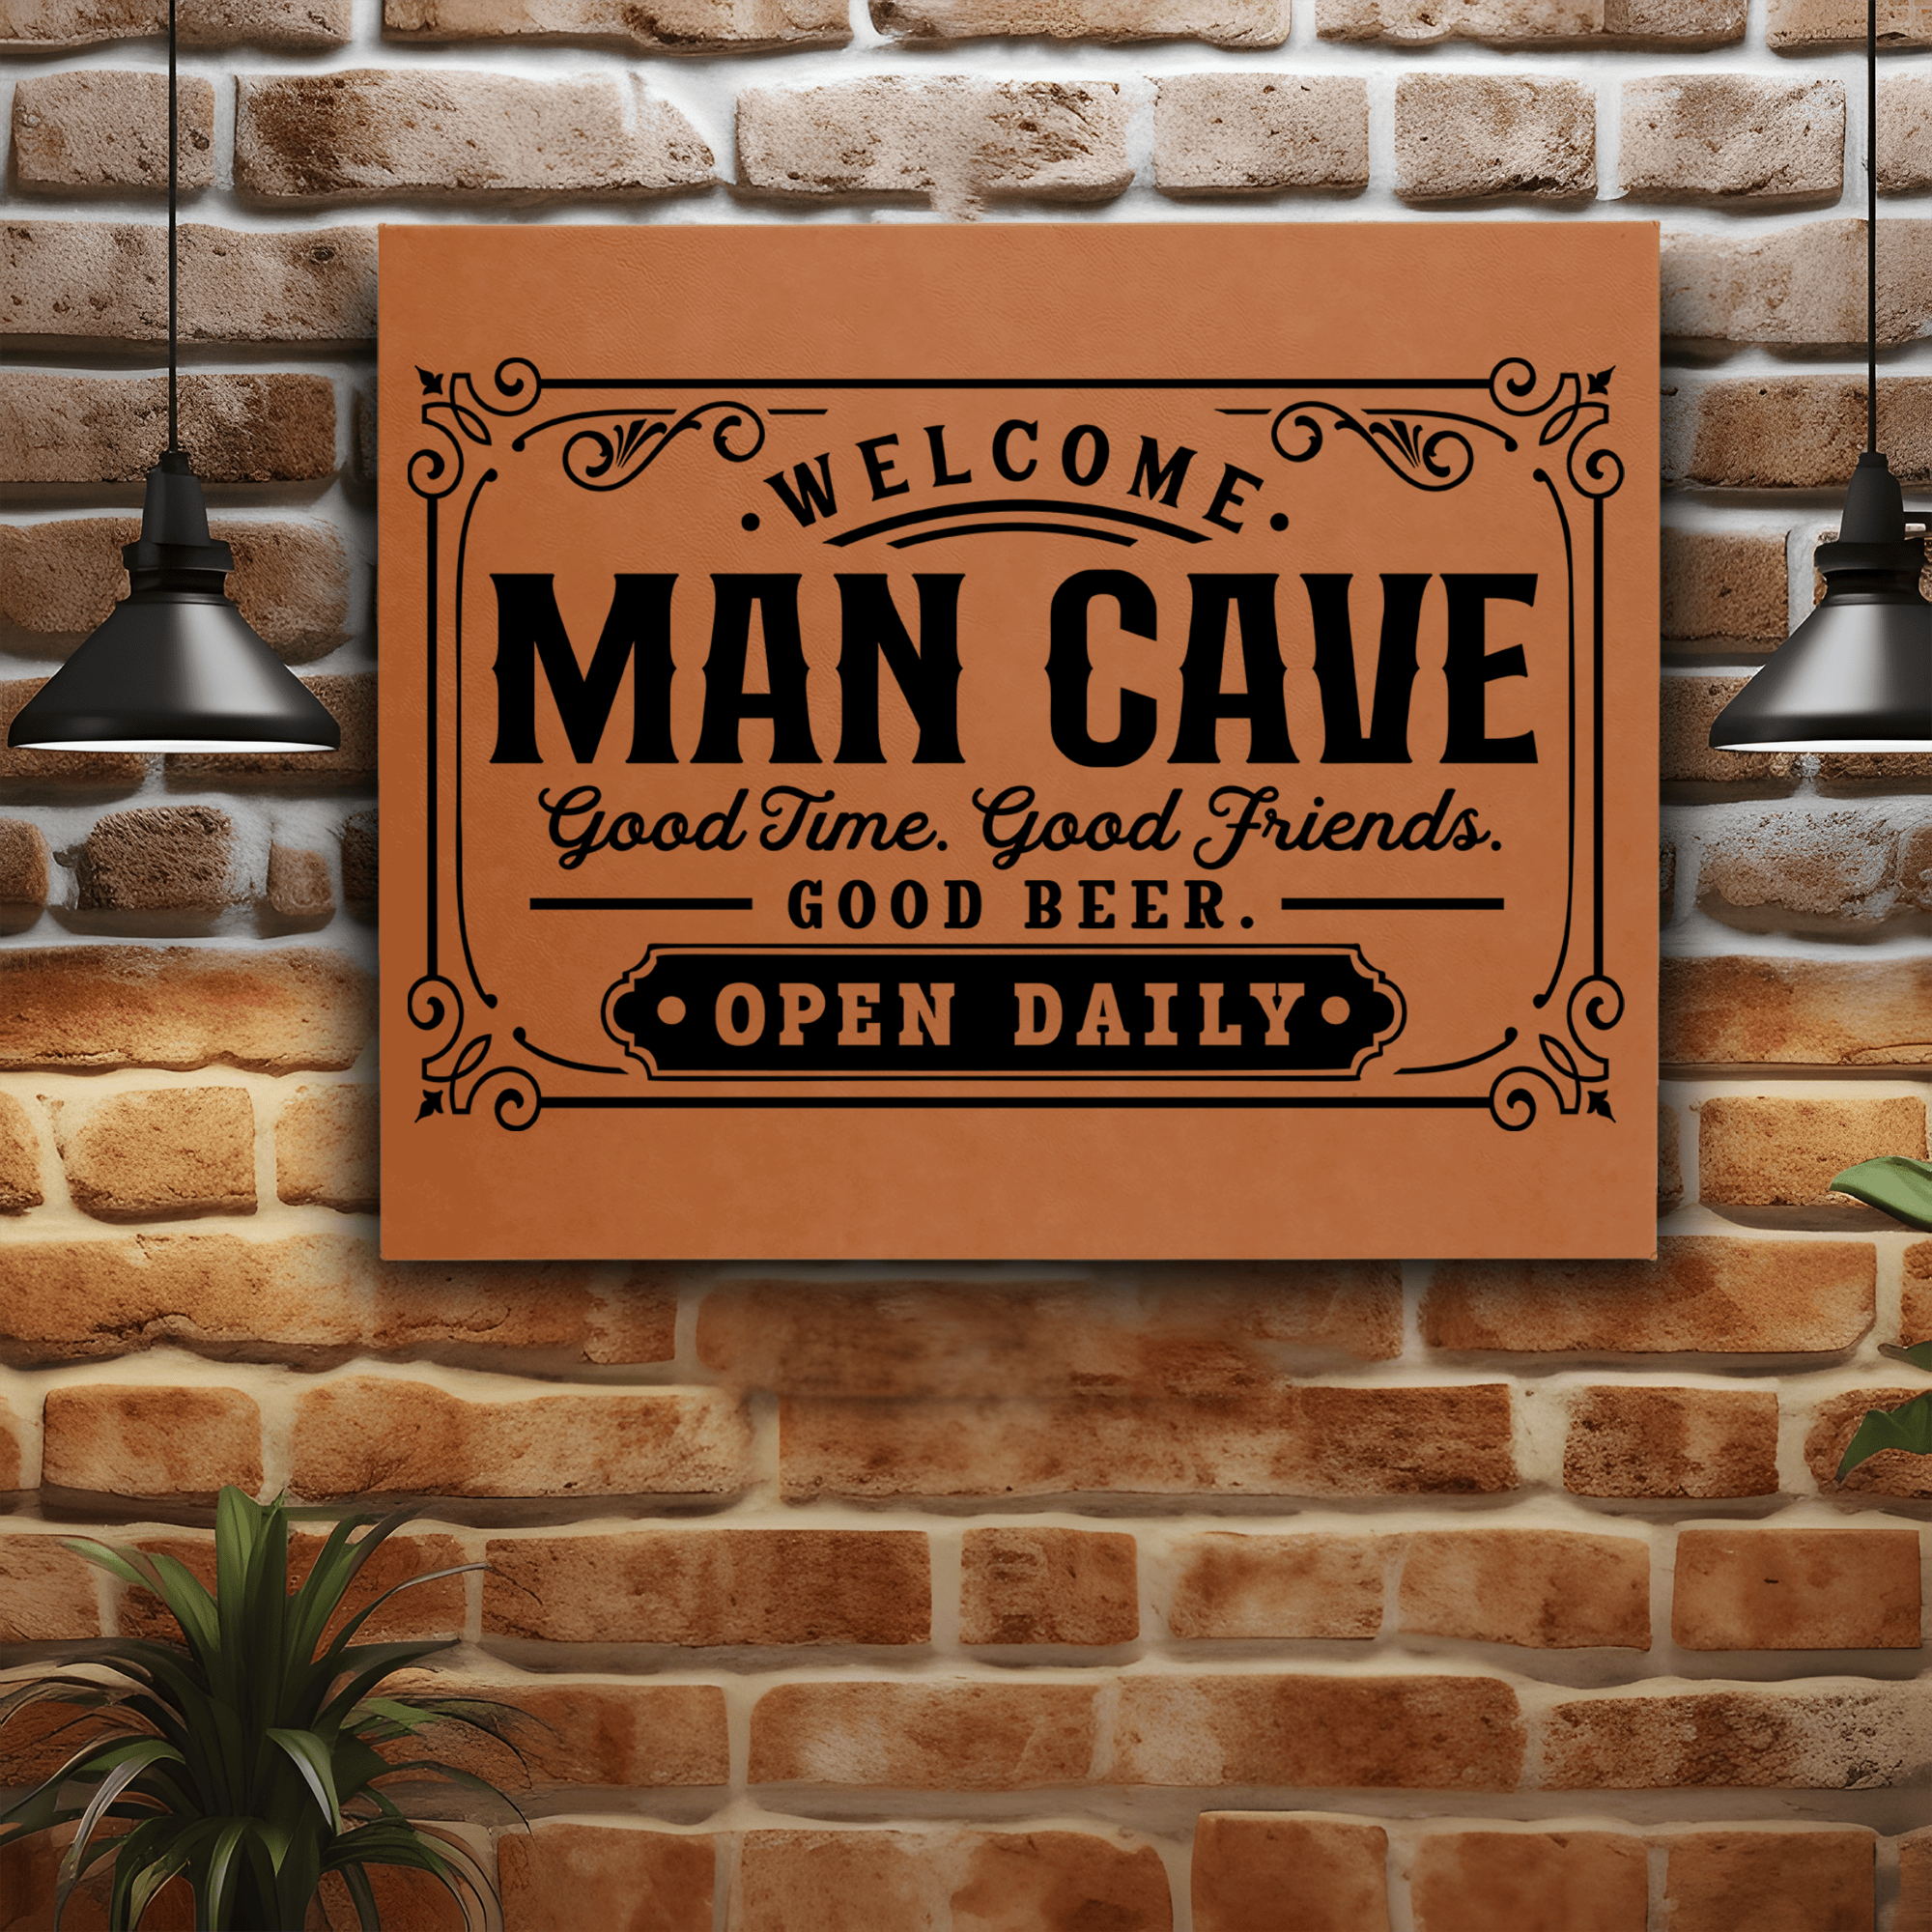 Rawhide Leather Wall Decor With Man Cave Open Daily Design